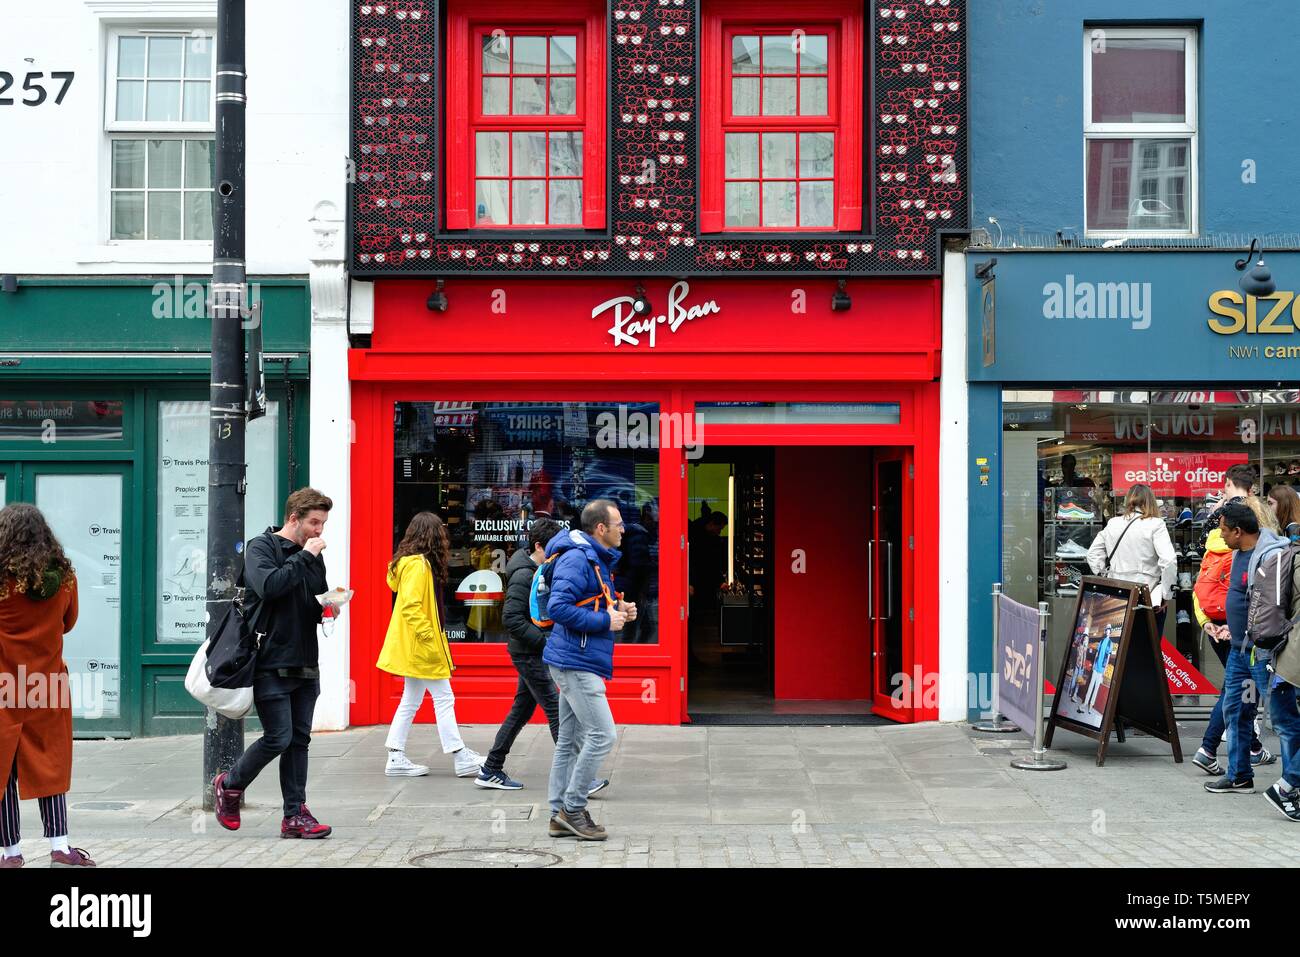 The Ray Ban colourful shop front on 